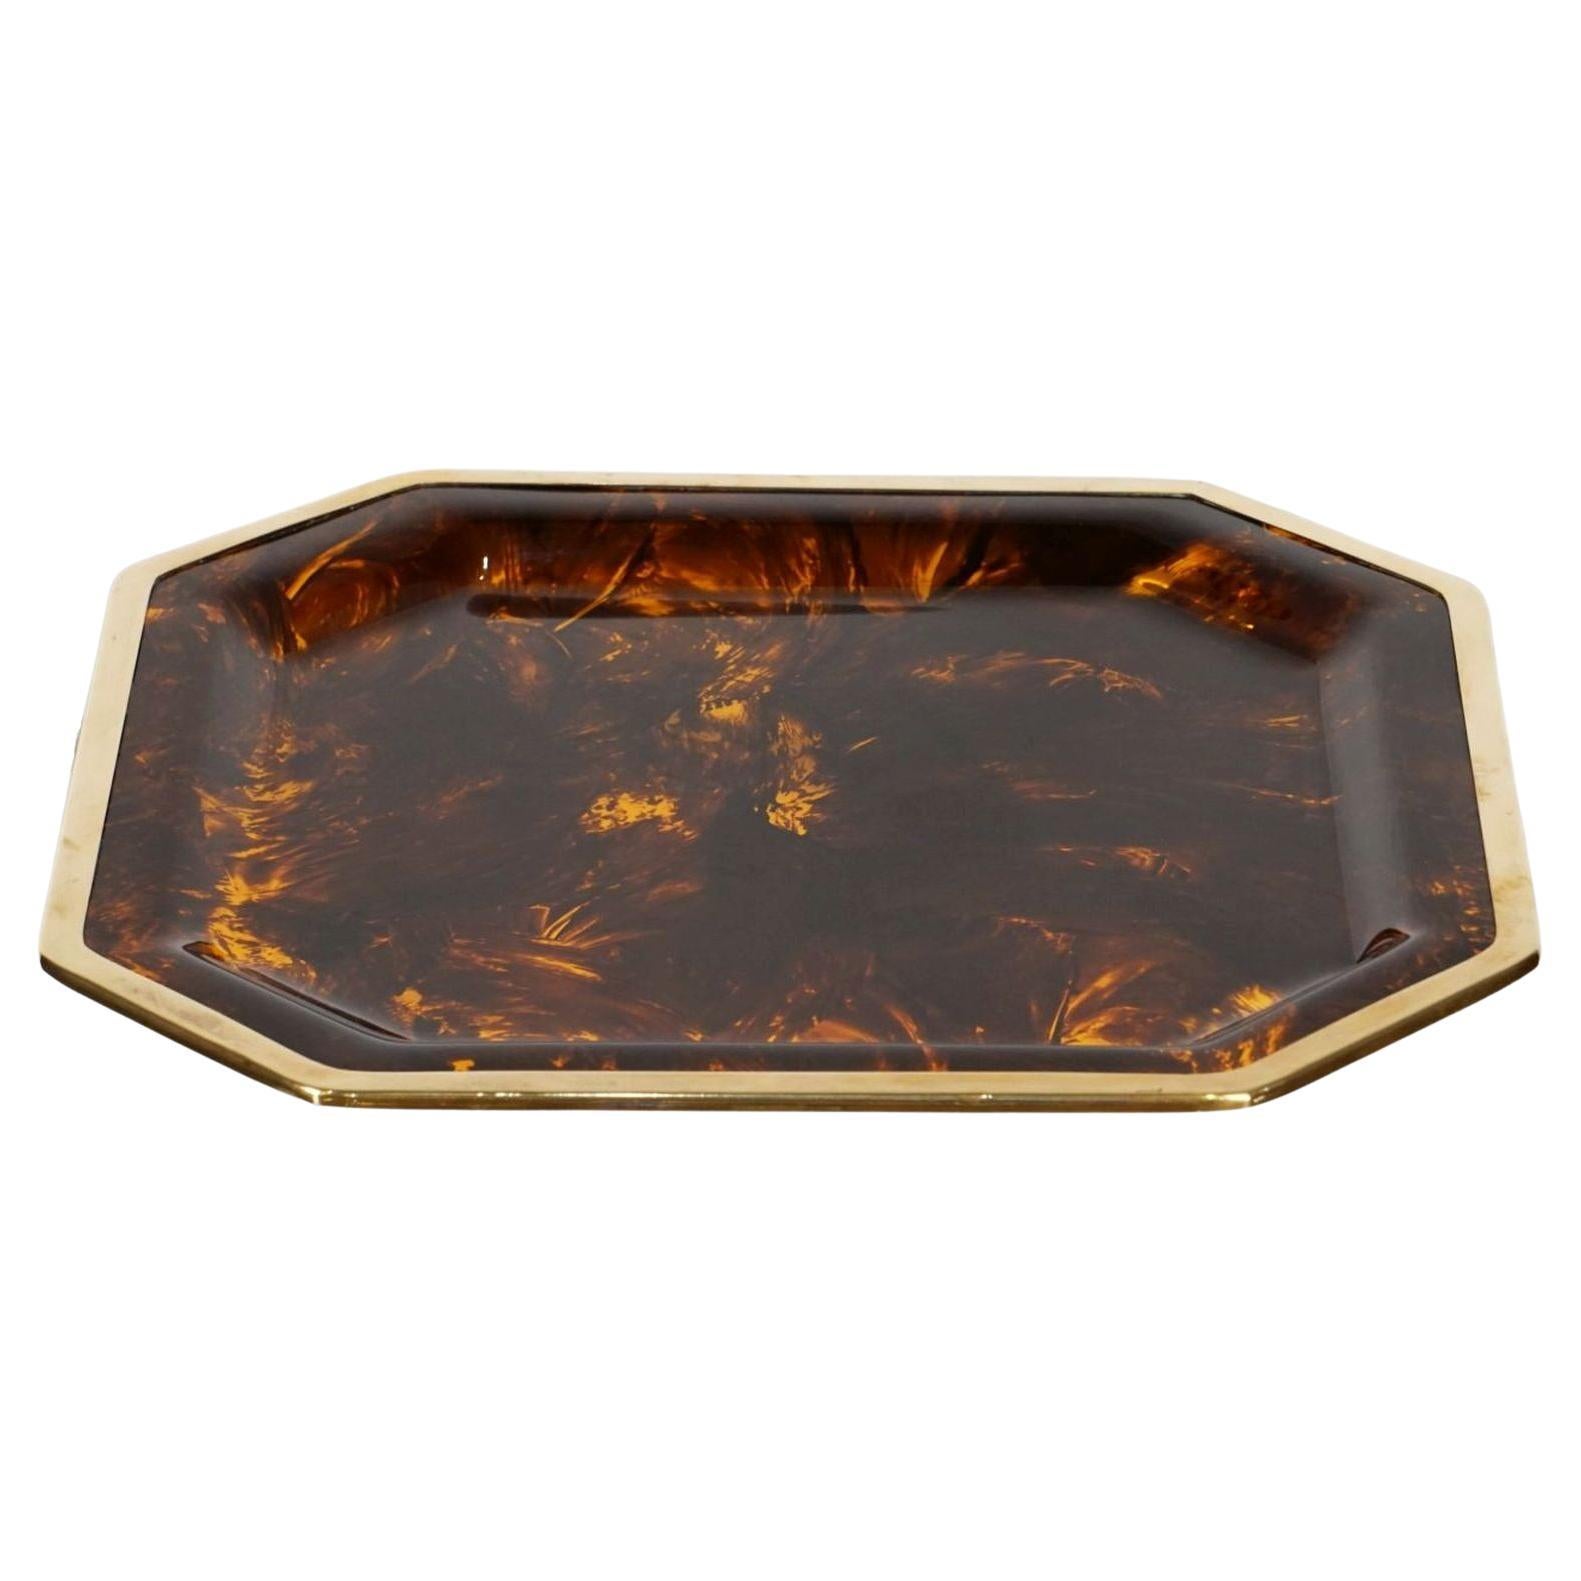 A fine large French recessed octagonal serving tray from the Mid-Century Modern period, of acrylic Lucite with a faux tortoiseshell (tortoise) pattern and gilded brass trim.

Two available - Individually priced - $1995 each tray. Measures: